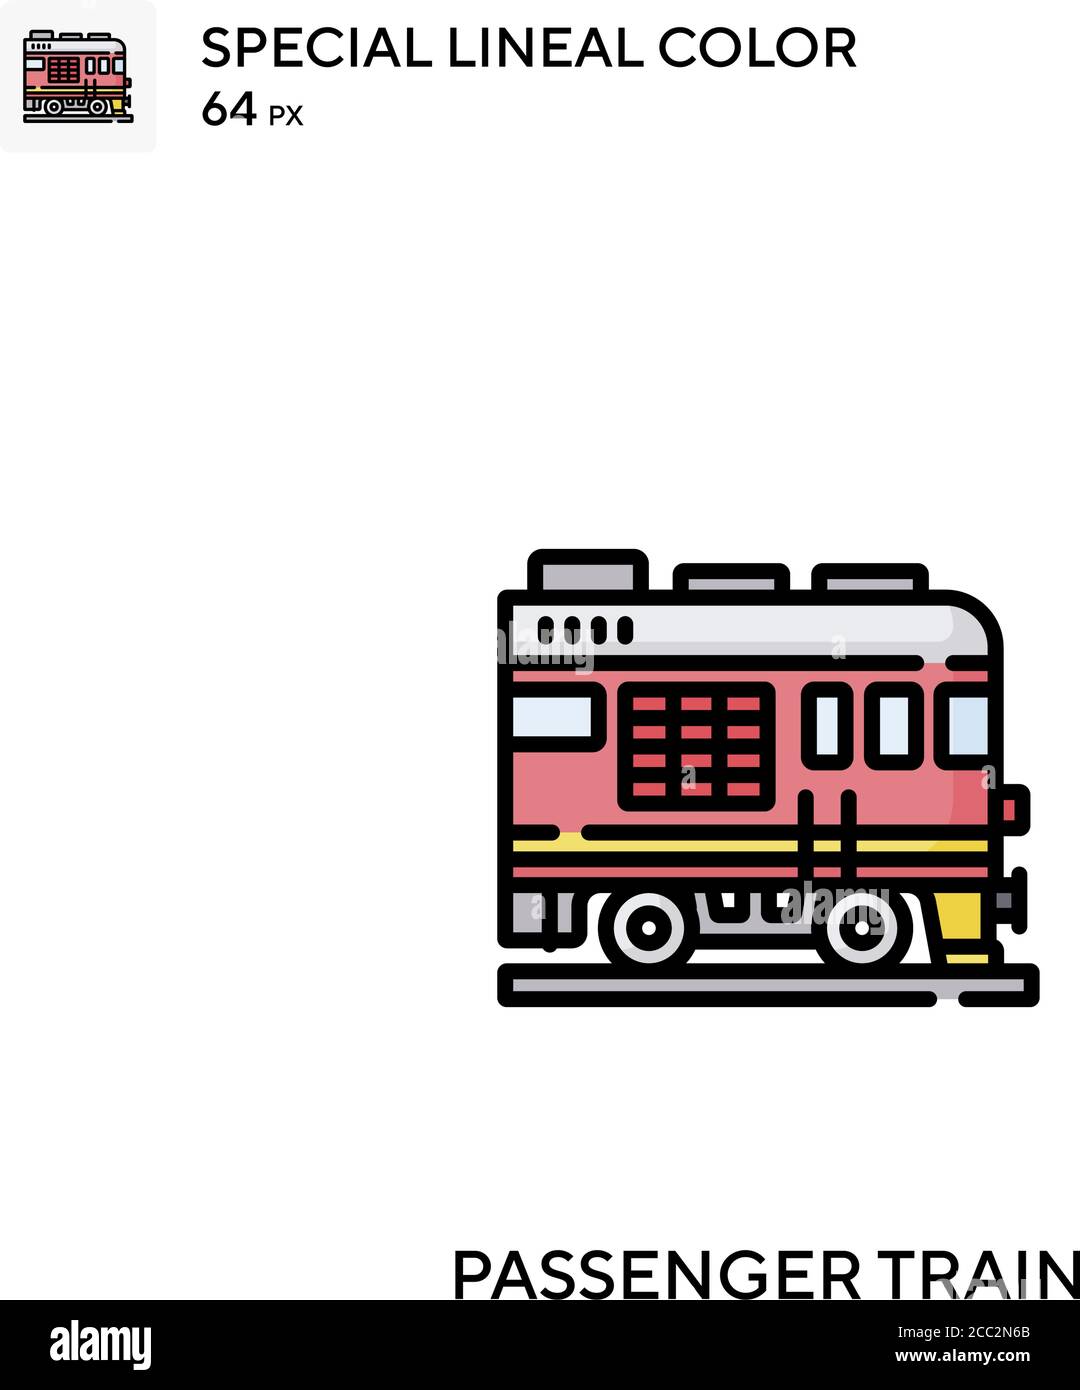 Passenger train Special lineal color vector icon. Passenger train icons for your business project Stock Vector